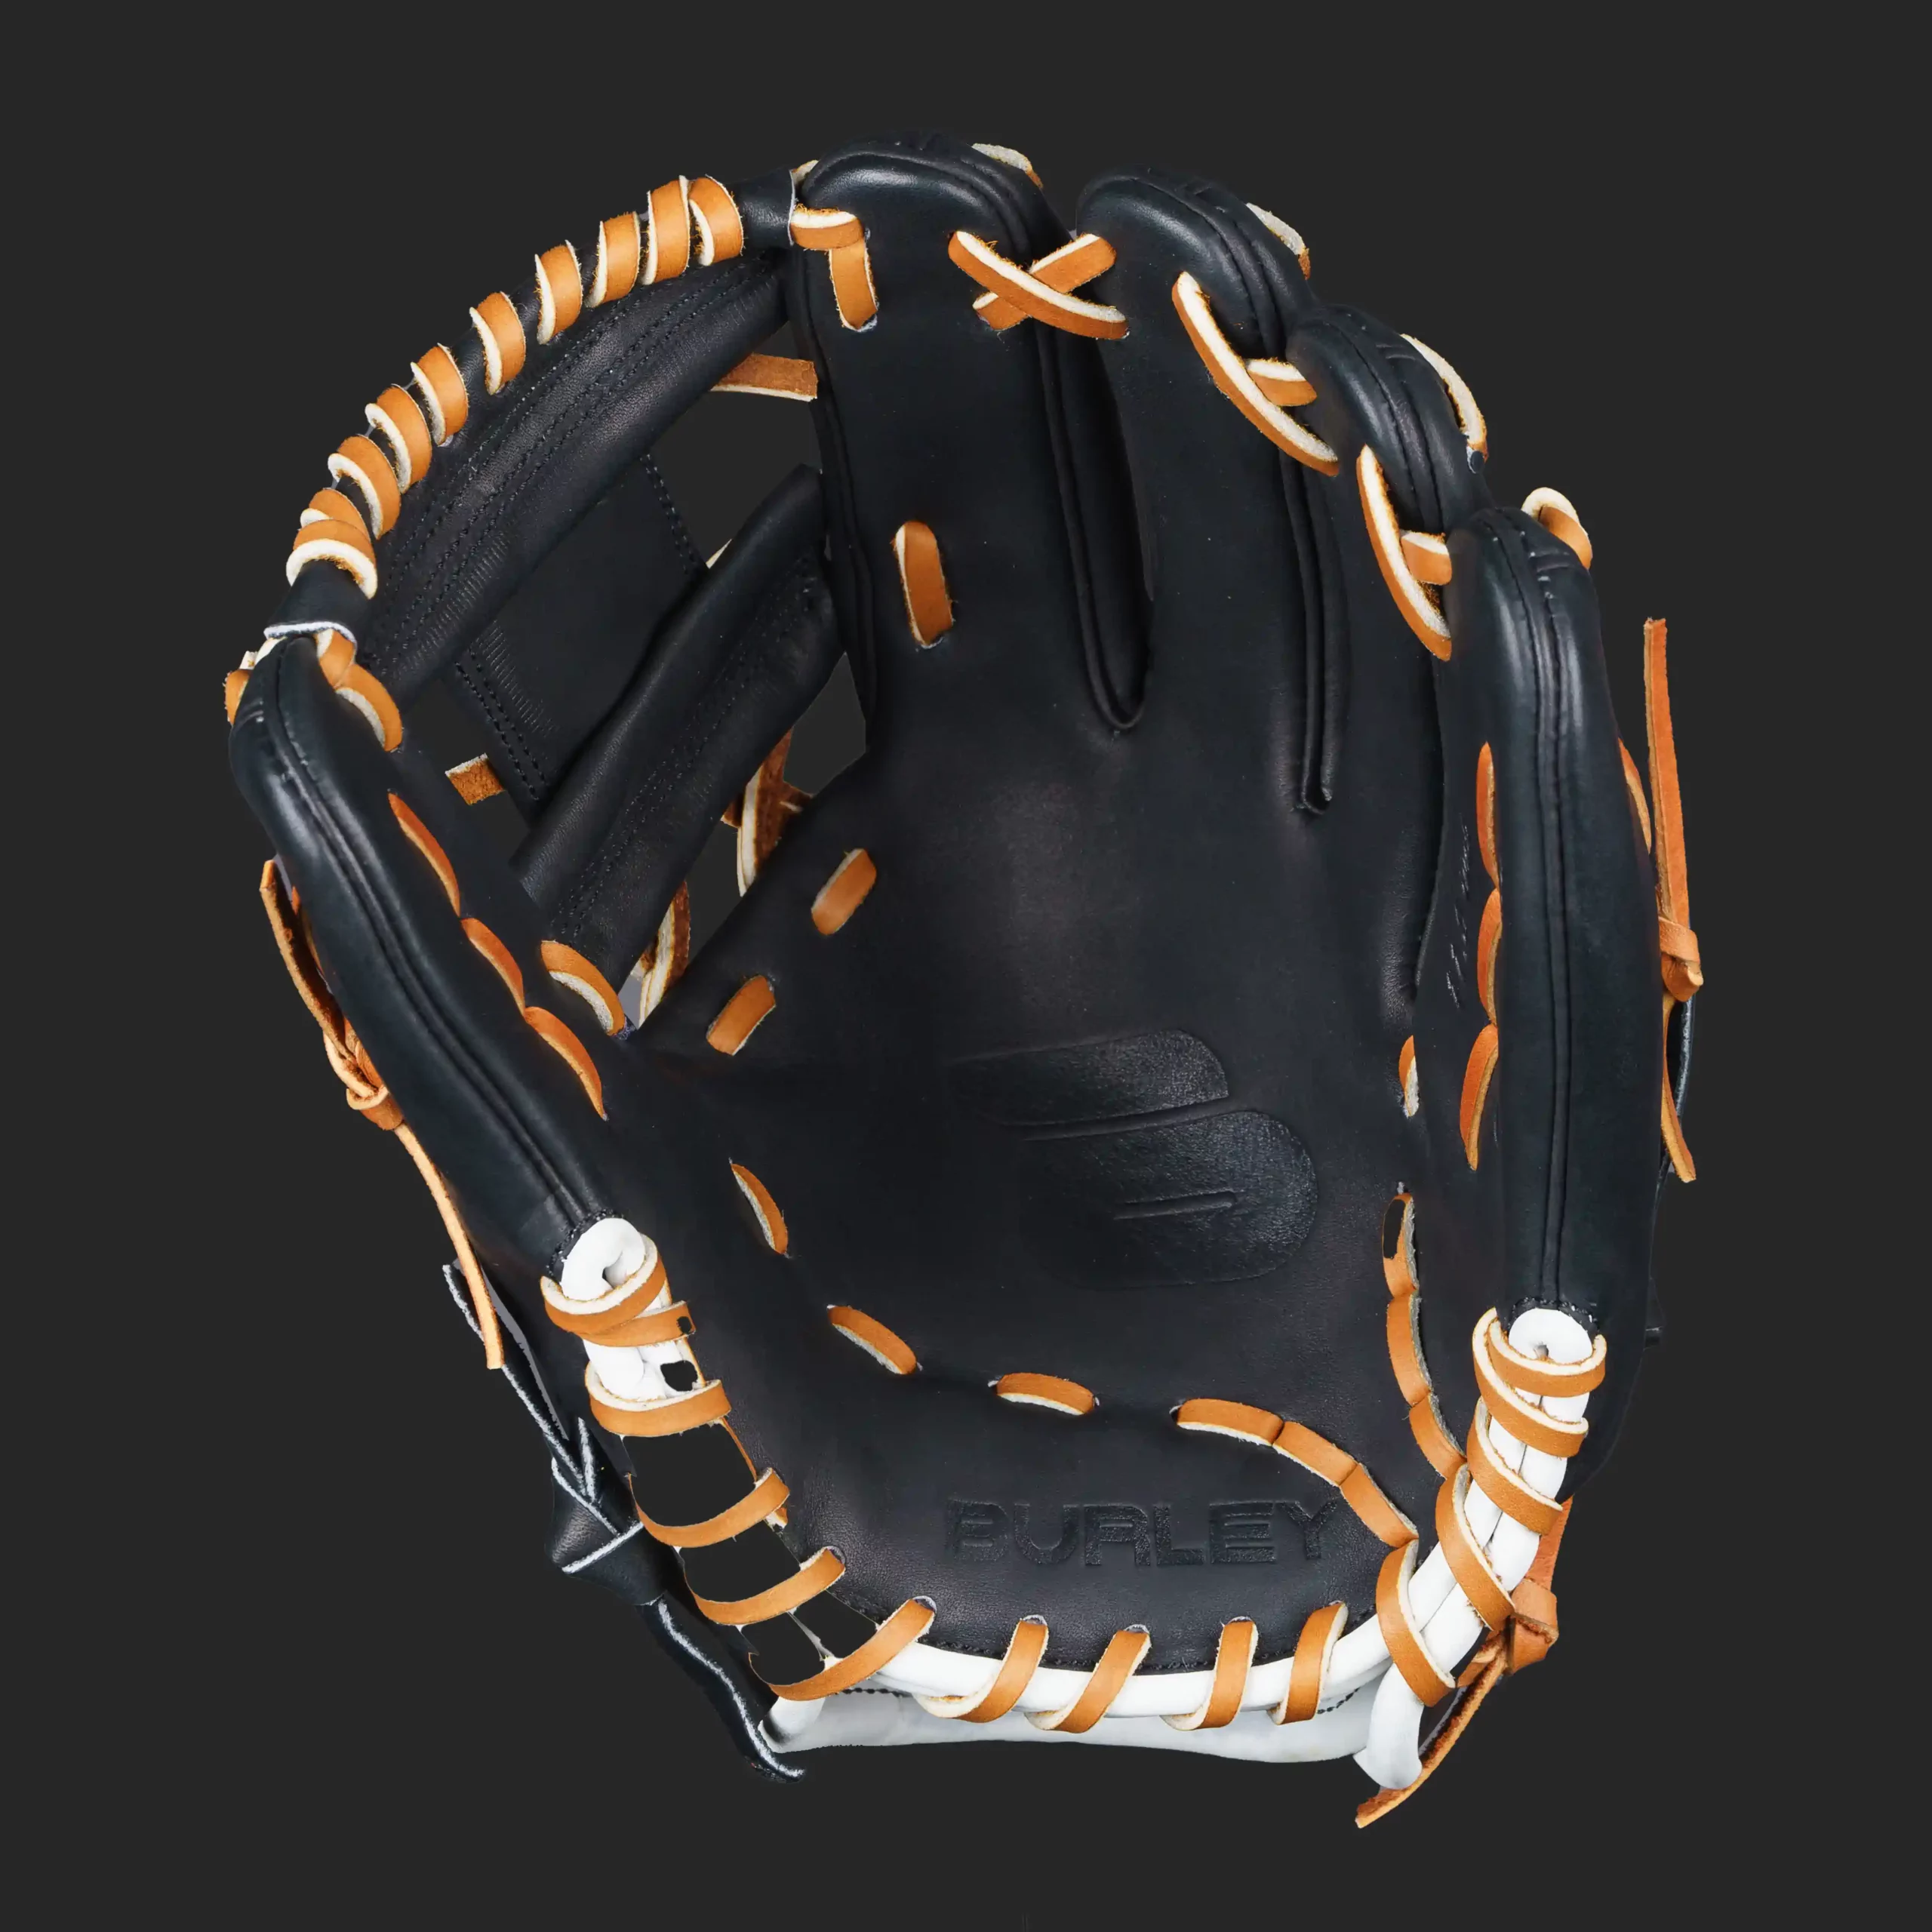 silver series infield glove black brown laces i web right 1